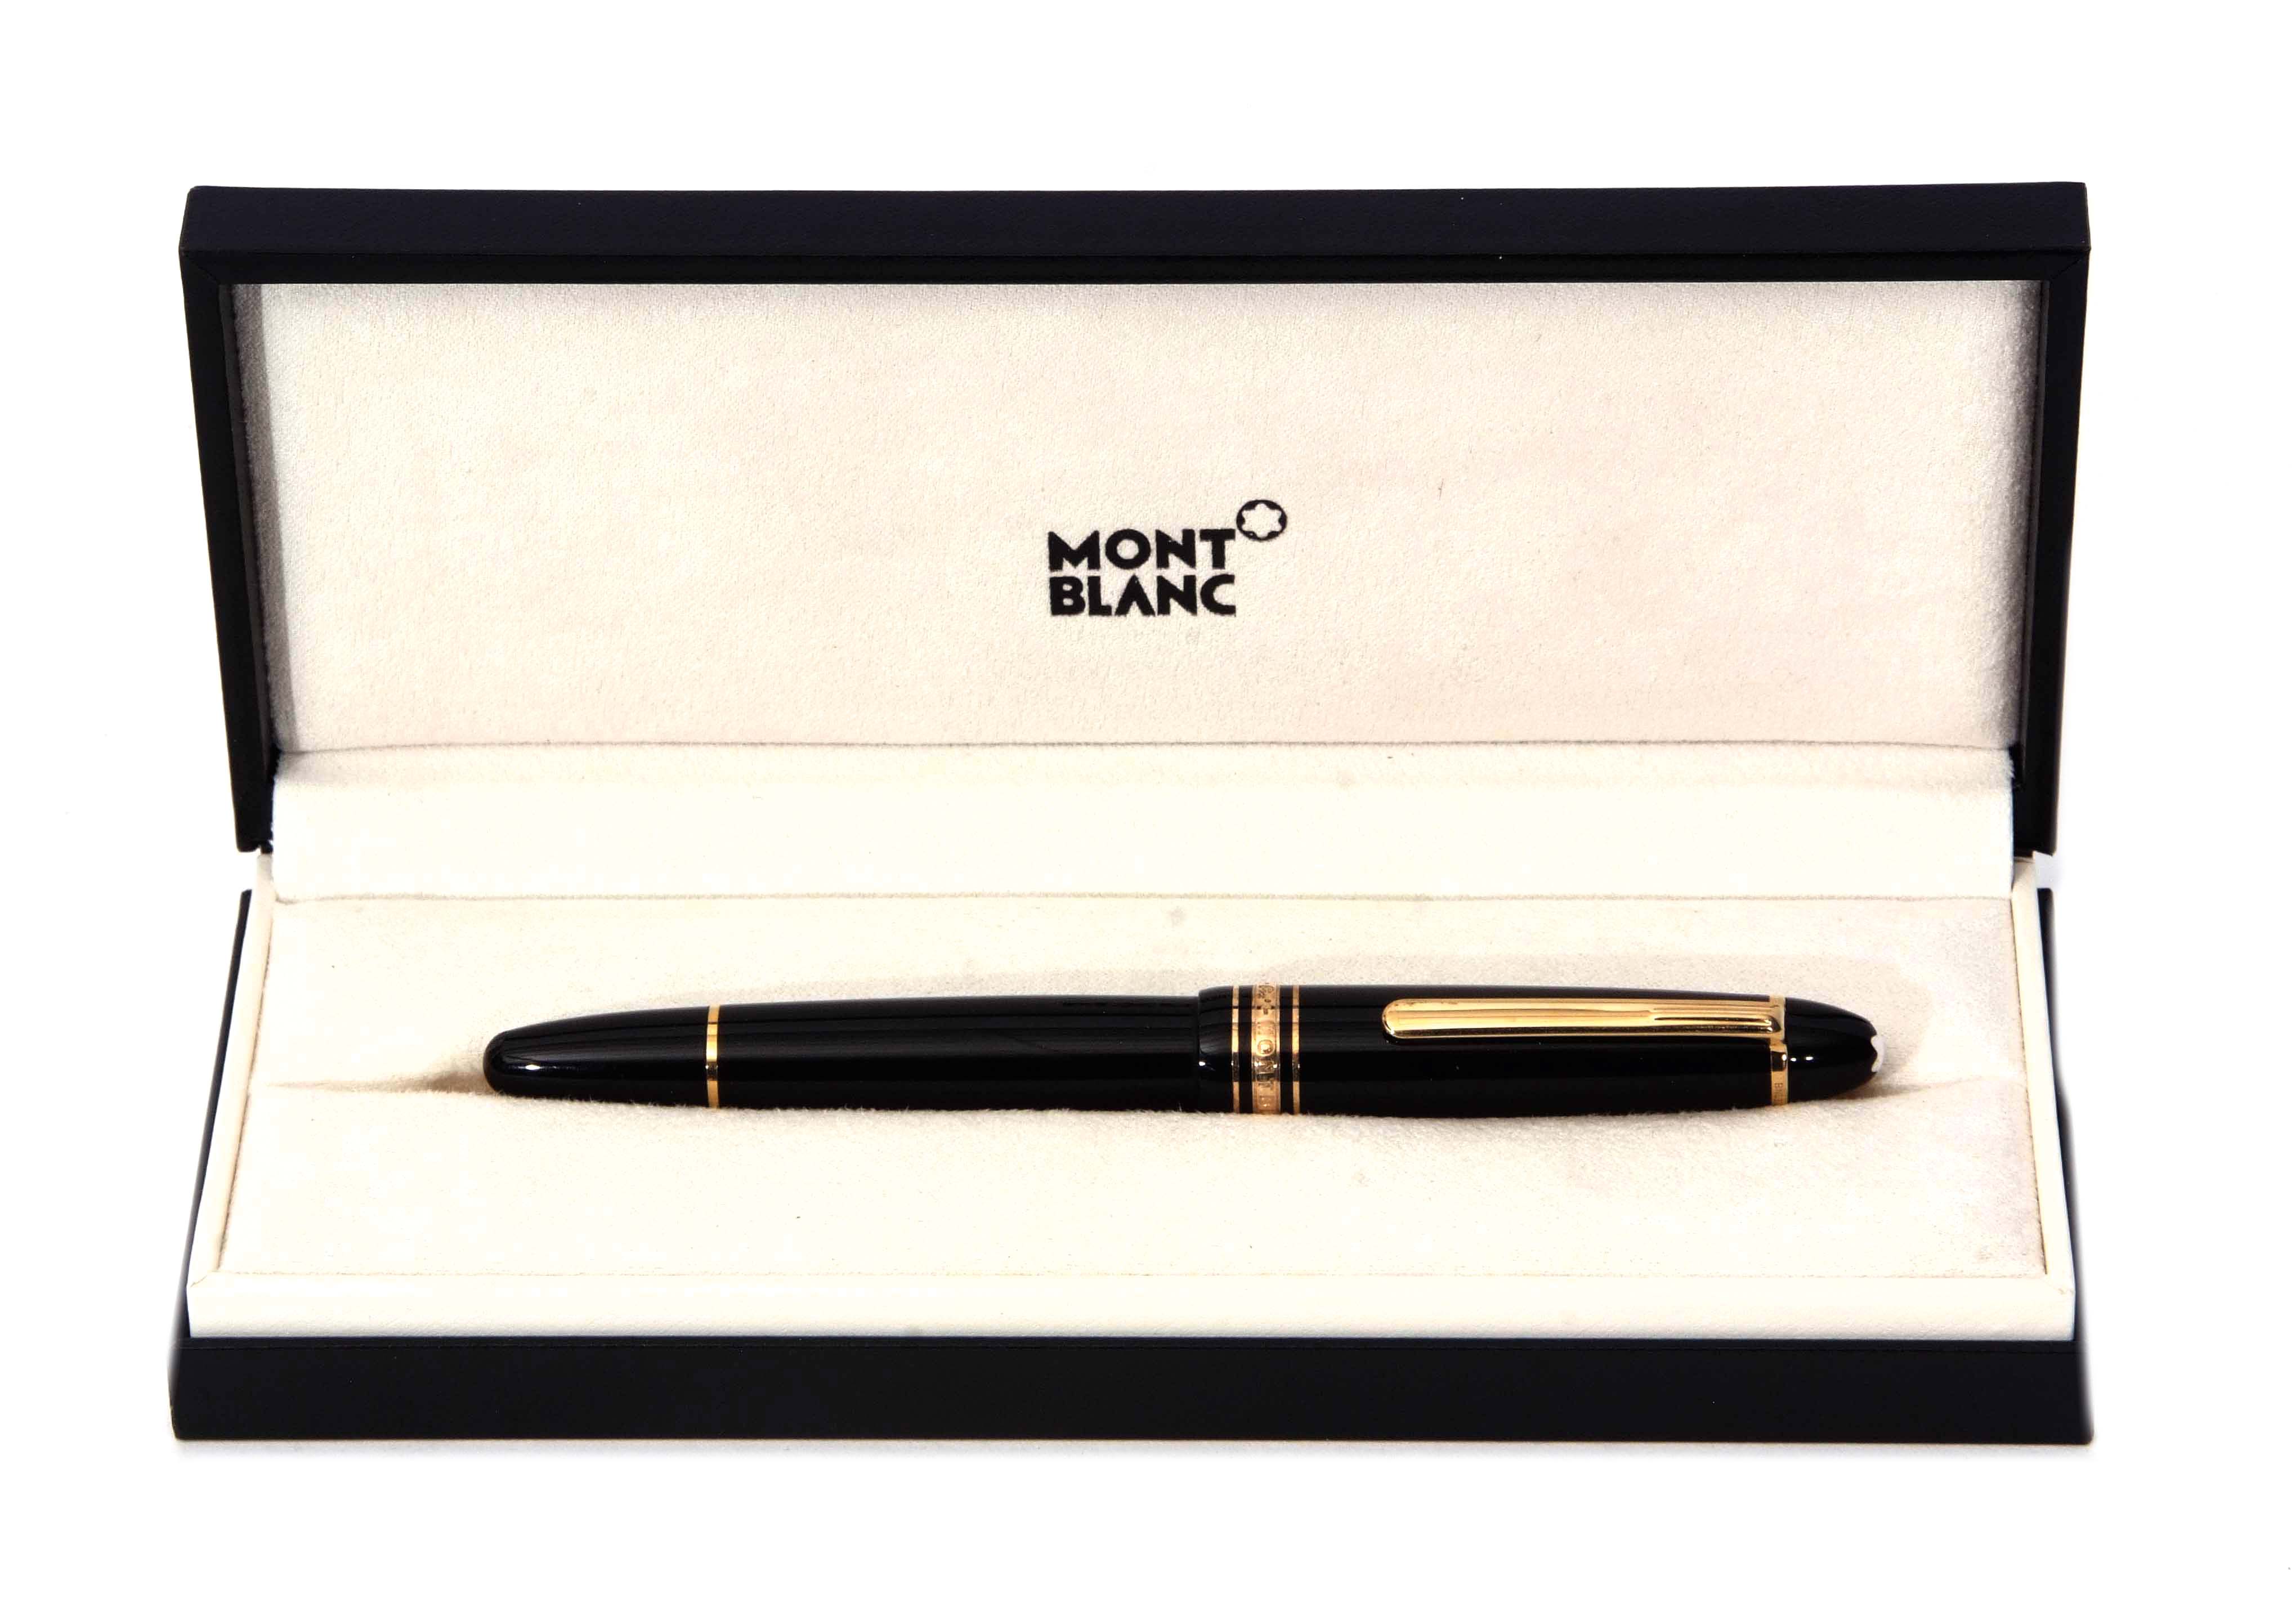 Late 20th century cased fountain pen, Mont Blanc, 4810, of typical cylindrical form with screw